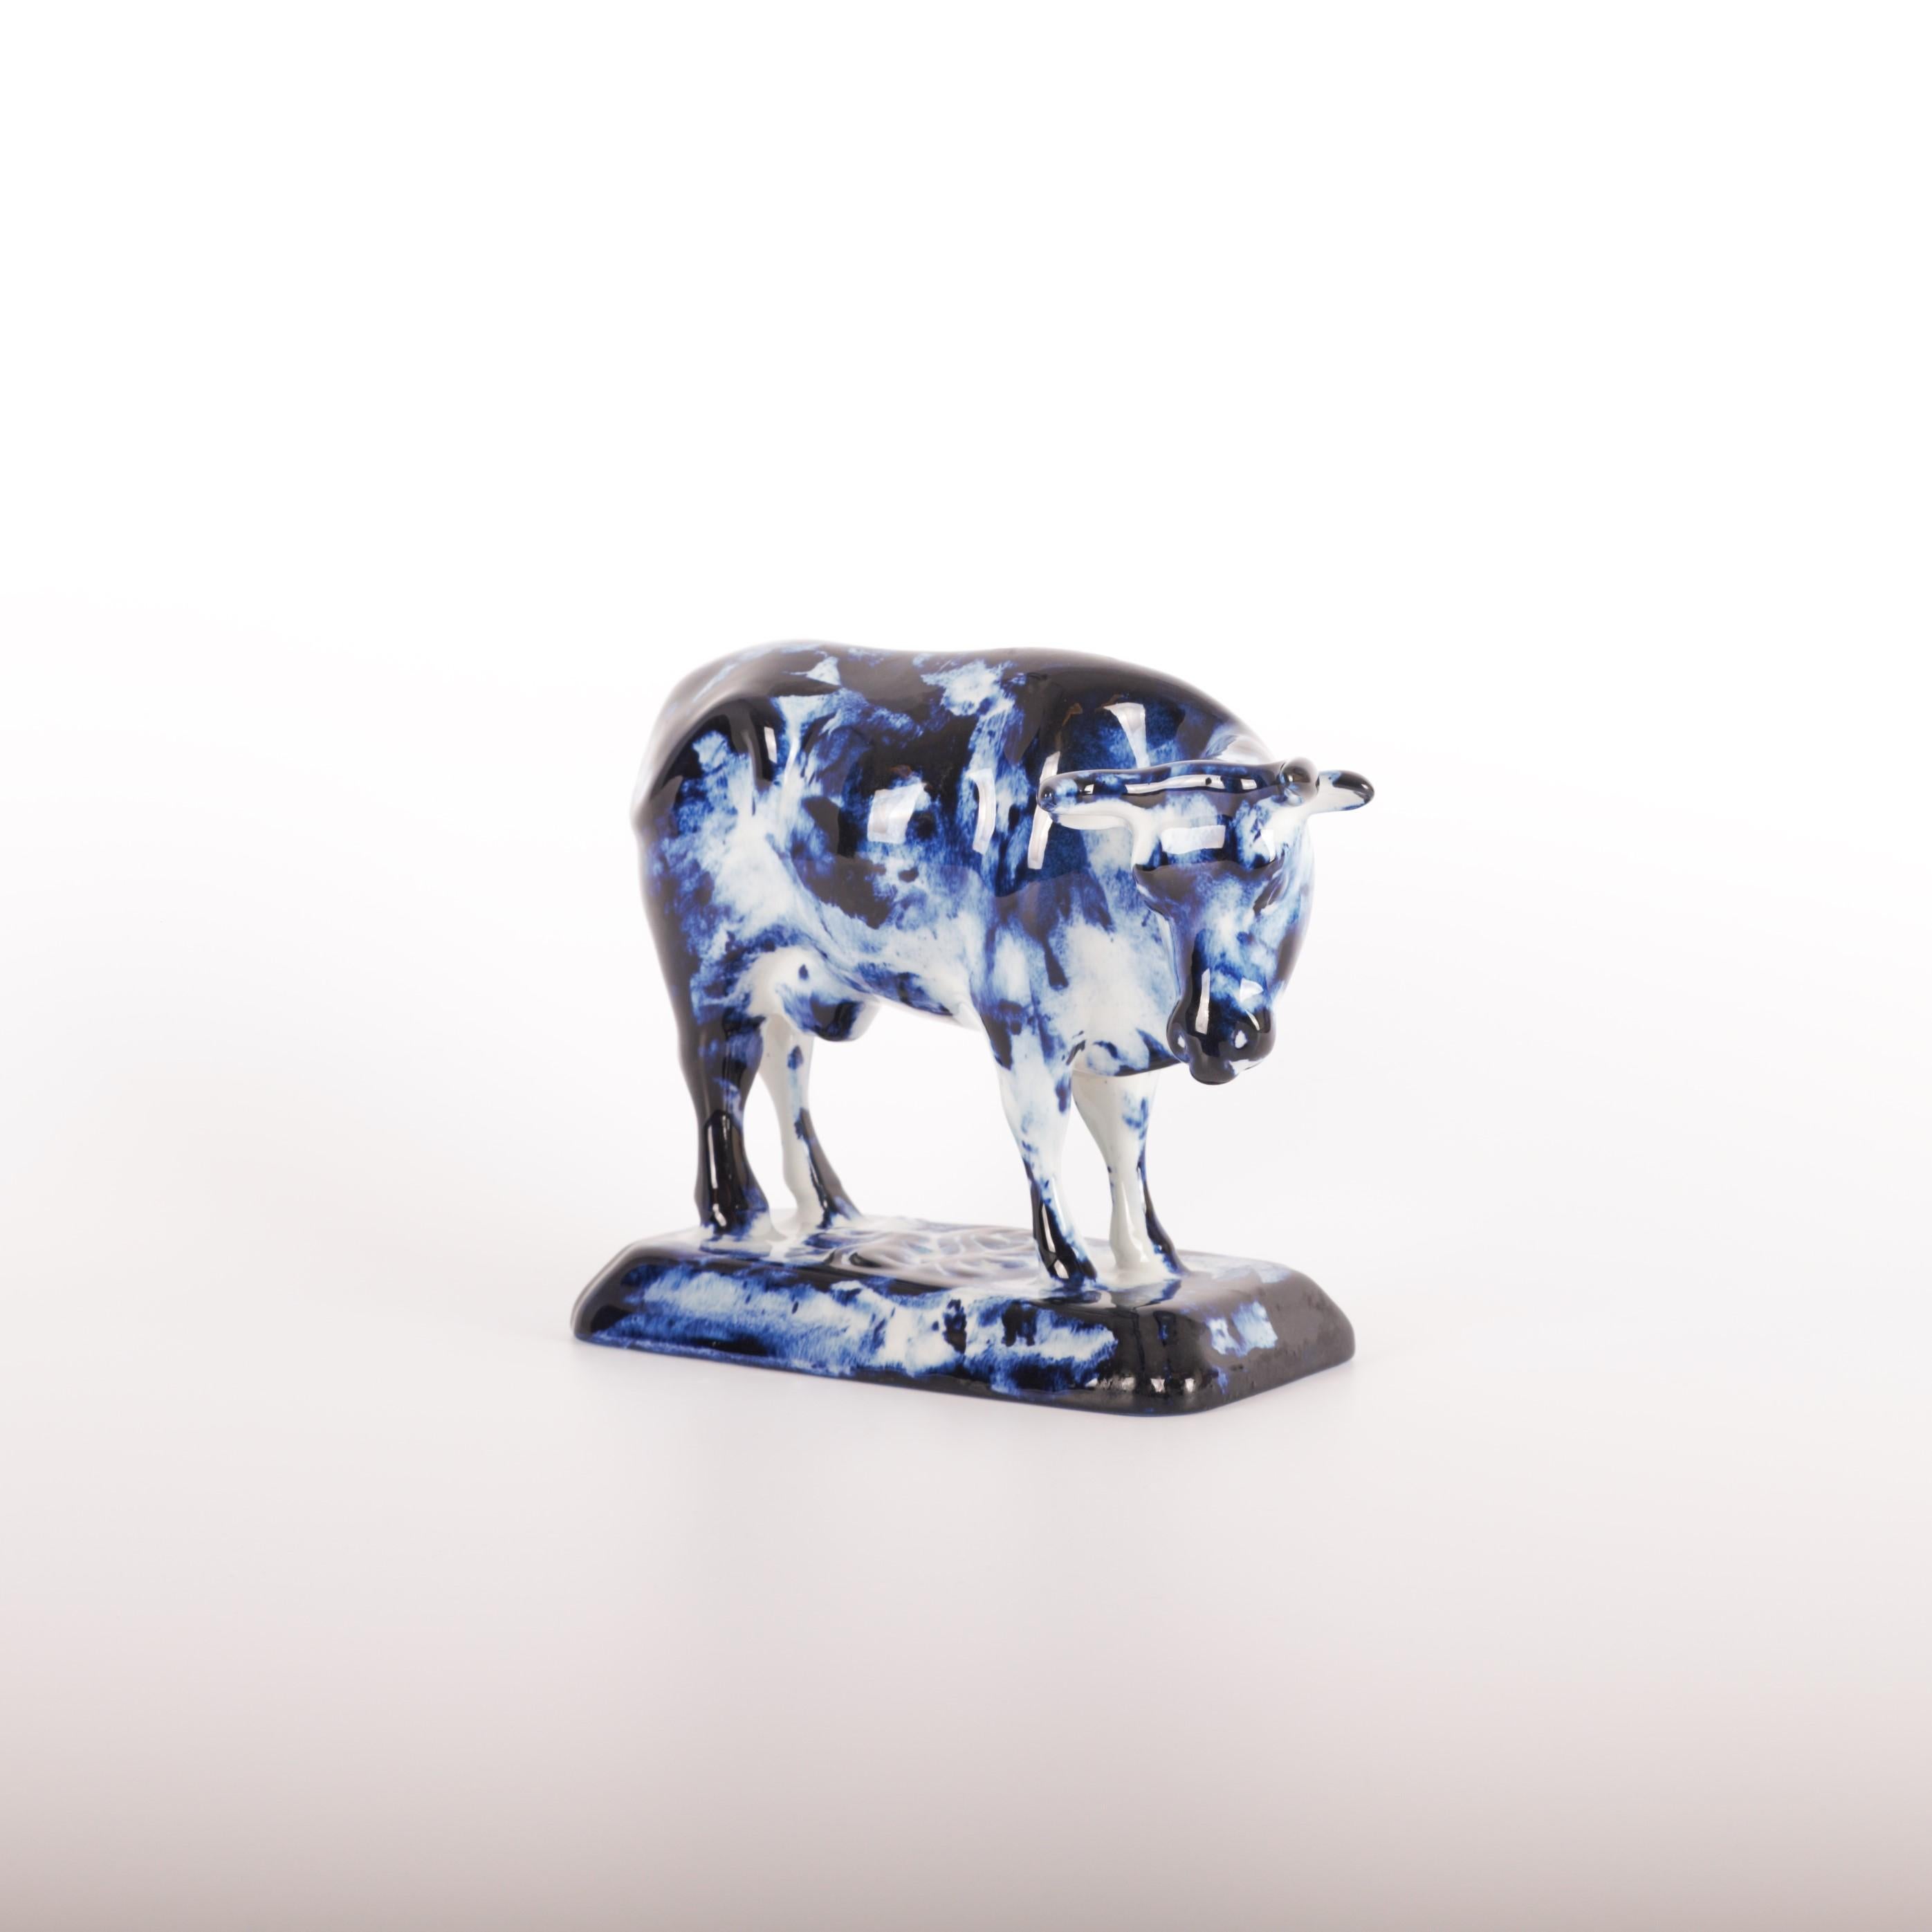 The Delft Blue Cow is available as an exclusive Personal Edition, Marcel Wanders' label carrying works of a more personal and experimental nature. The pieces of the Delft Blue series are unlimited unique by Marcel's one minute delft blue